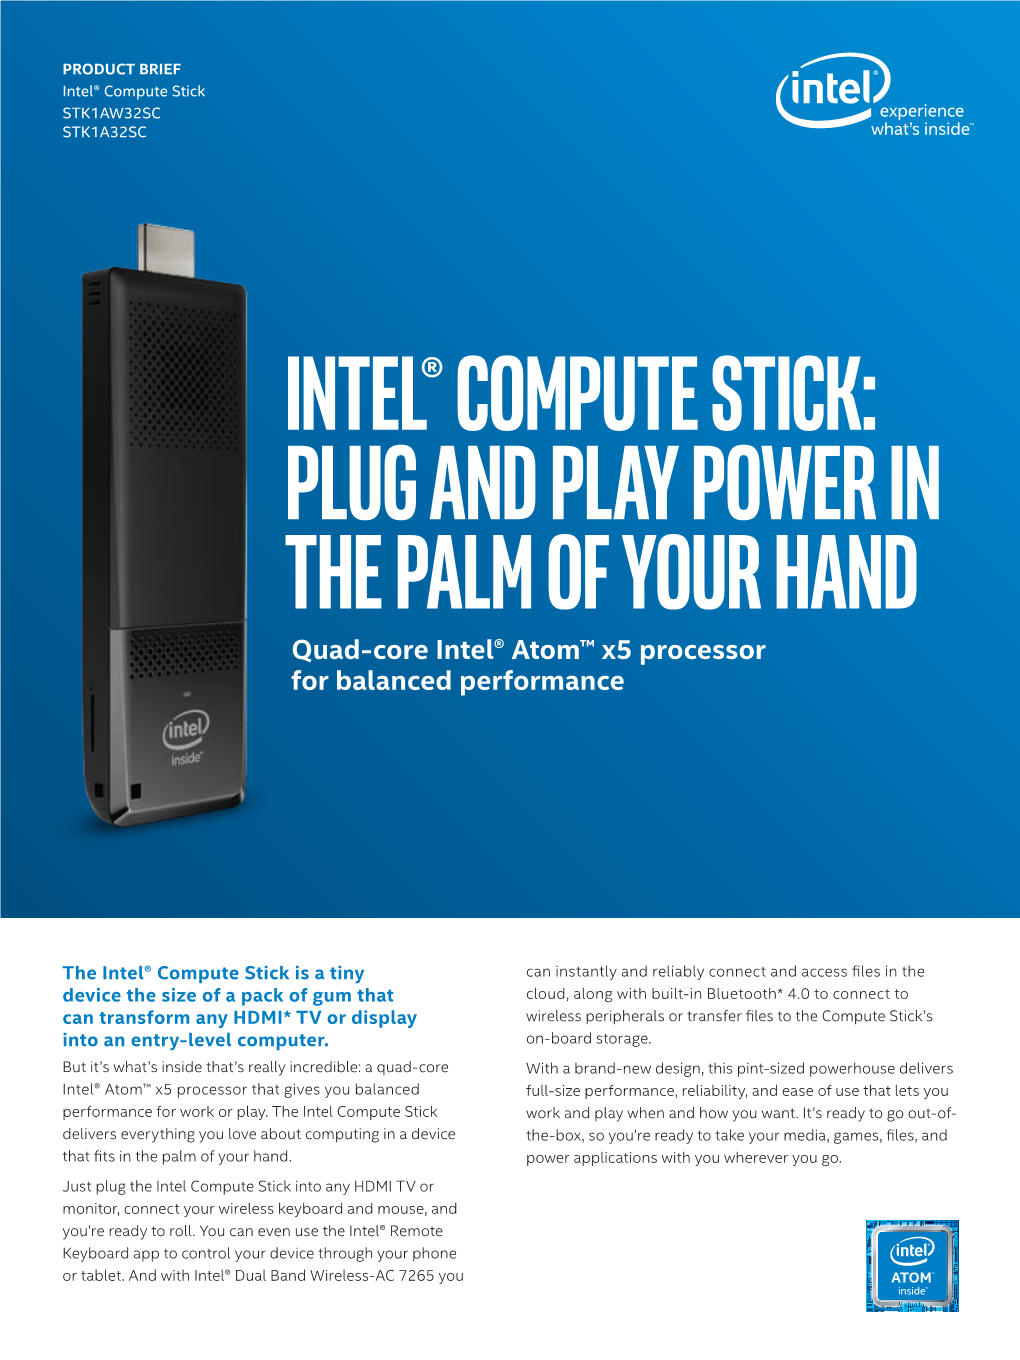 Intel®Compute Stick: Plug and Play Power in the Palm of Your Hand